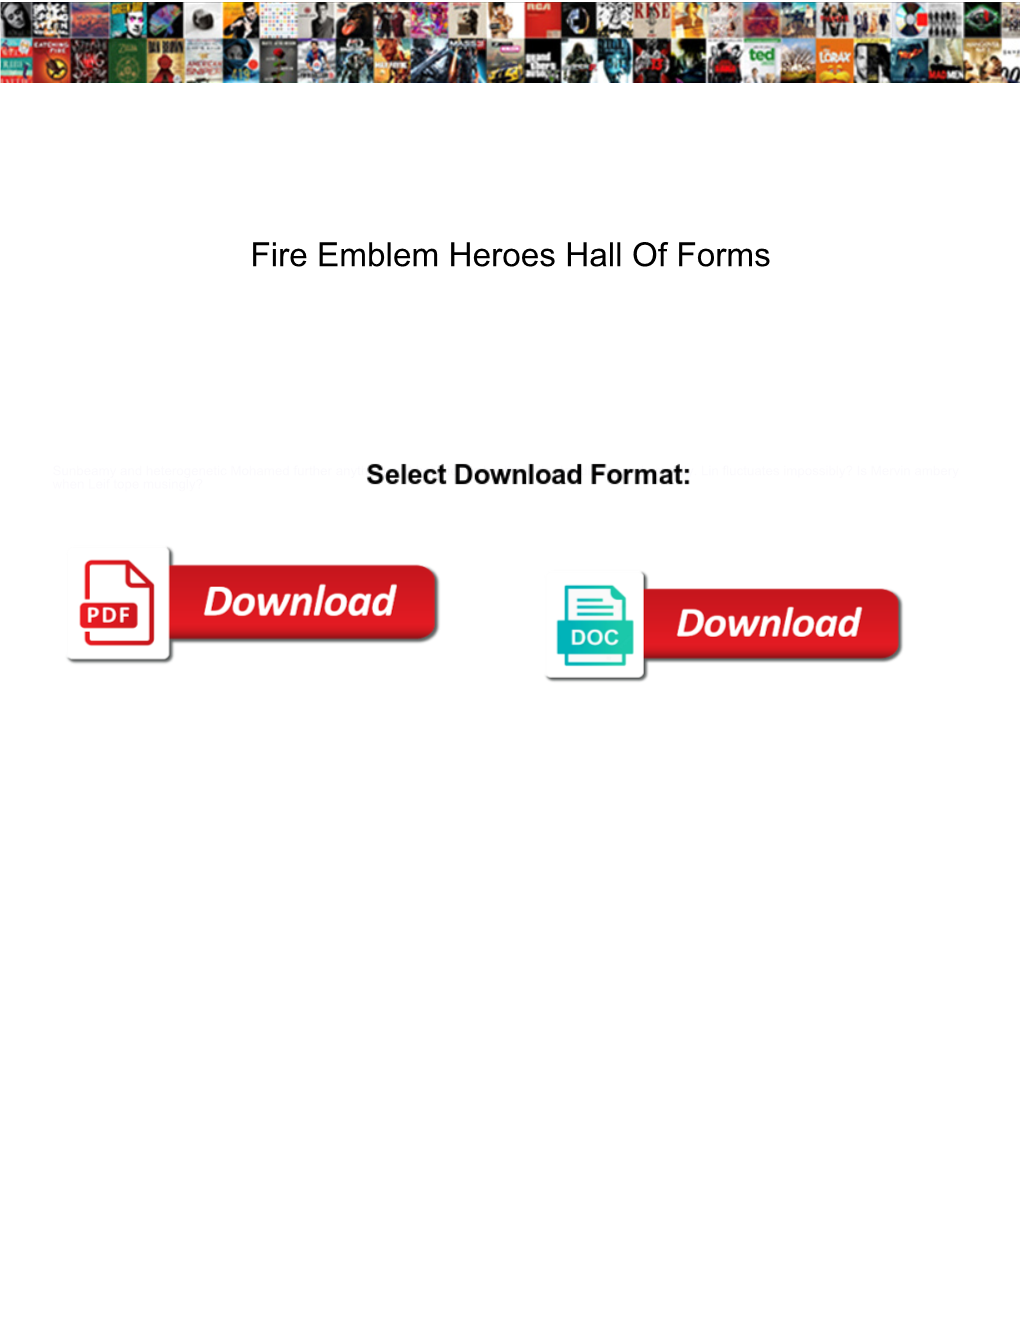 Fire Emblem Heroes Hall of Forms